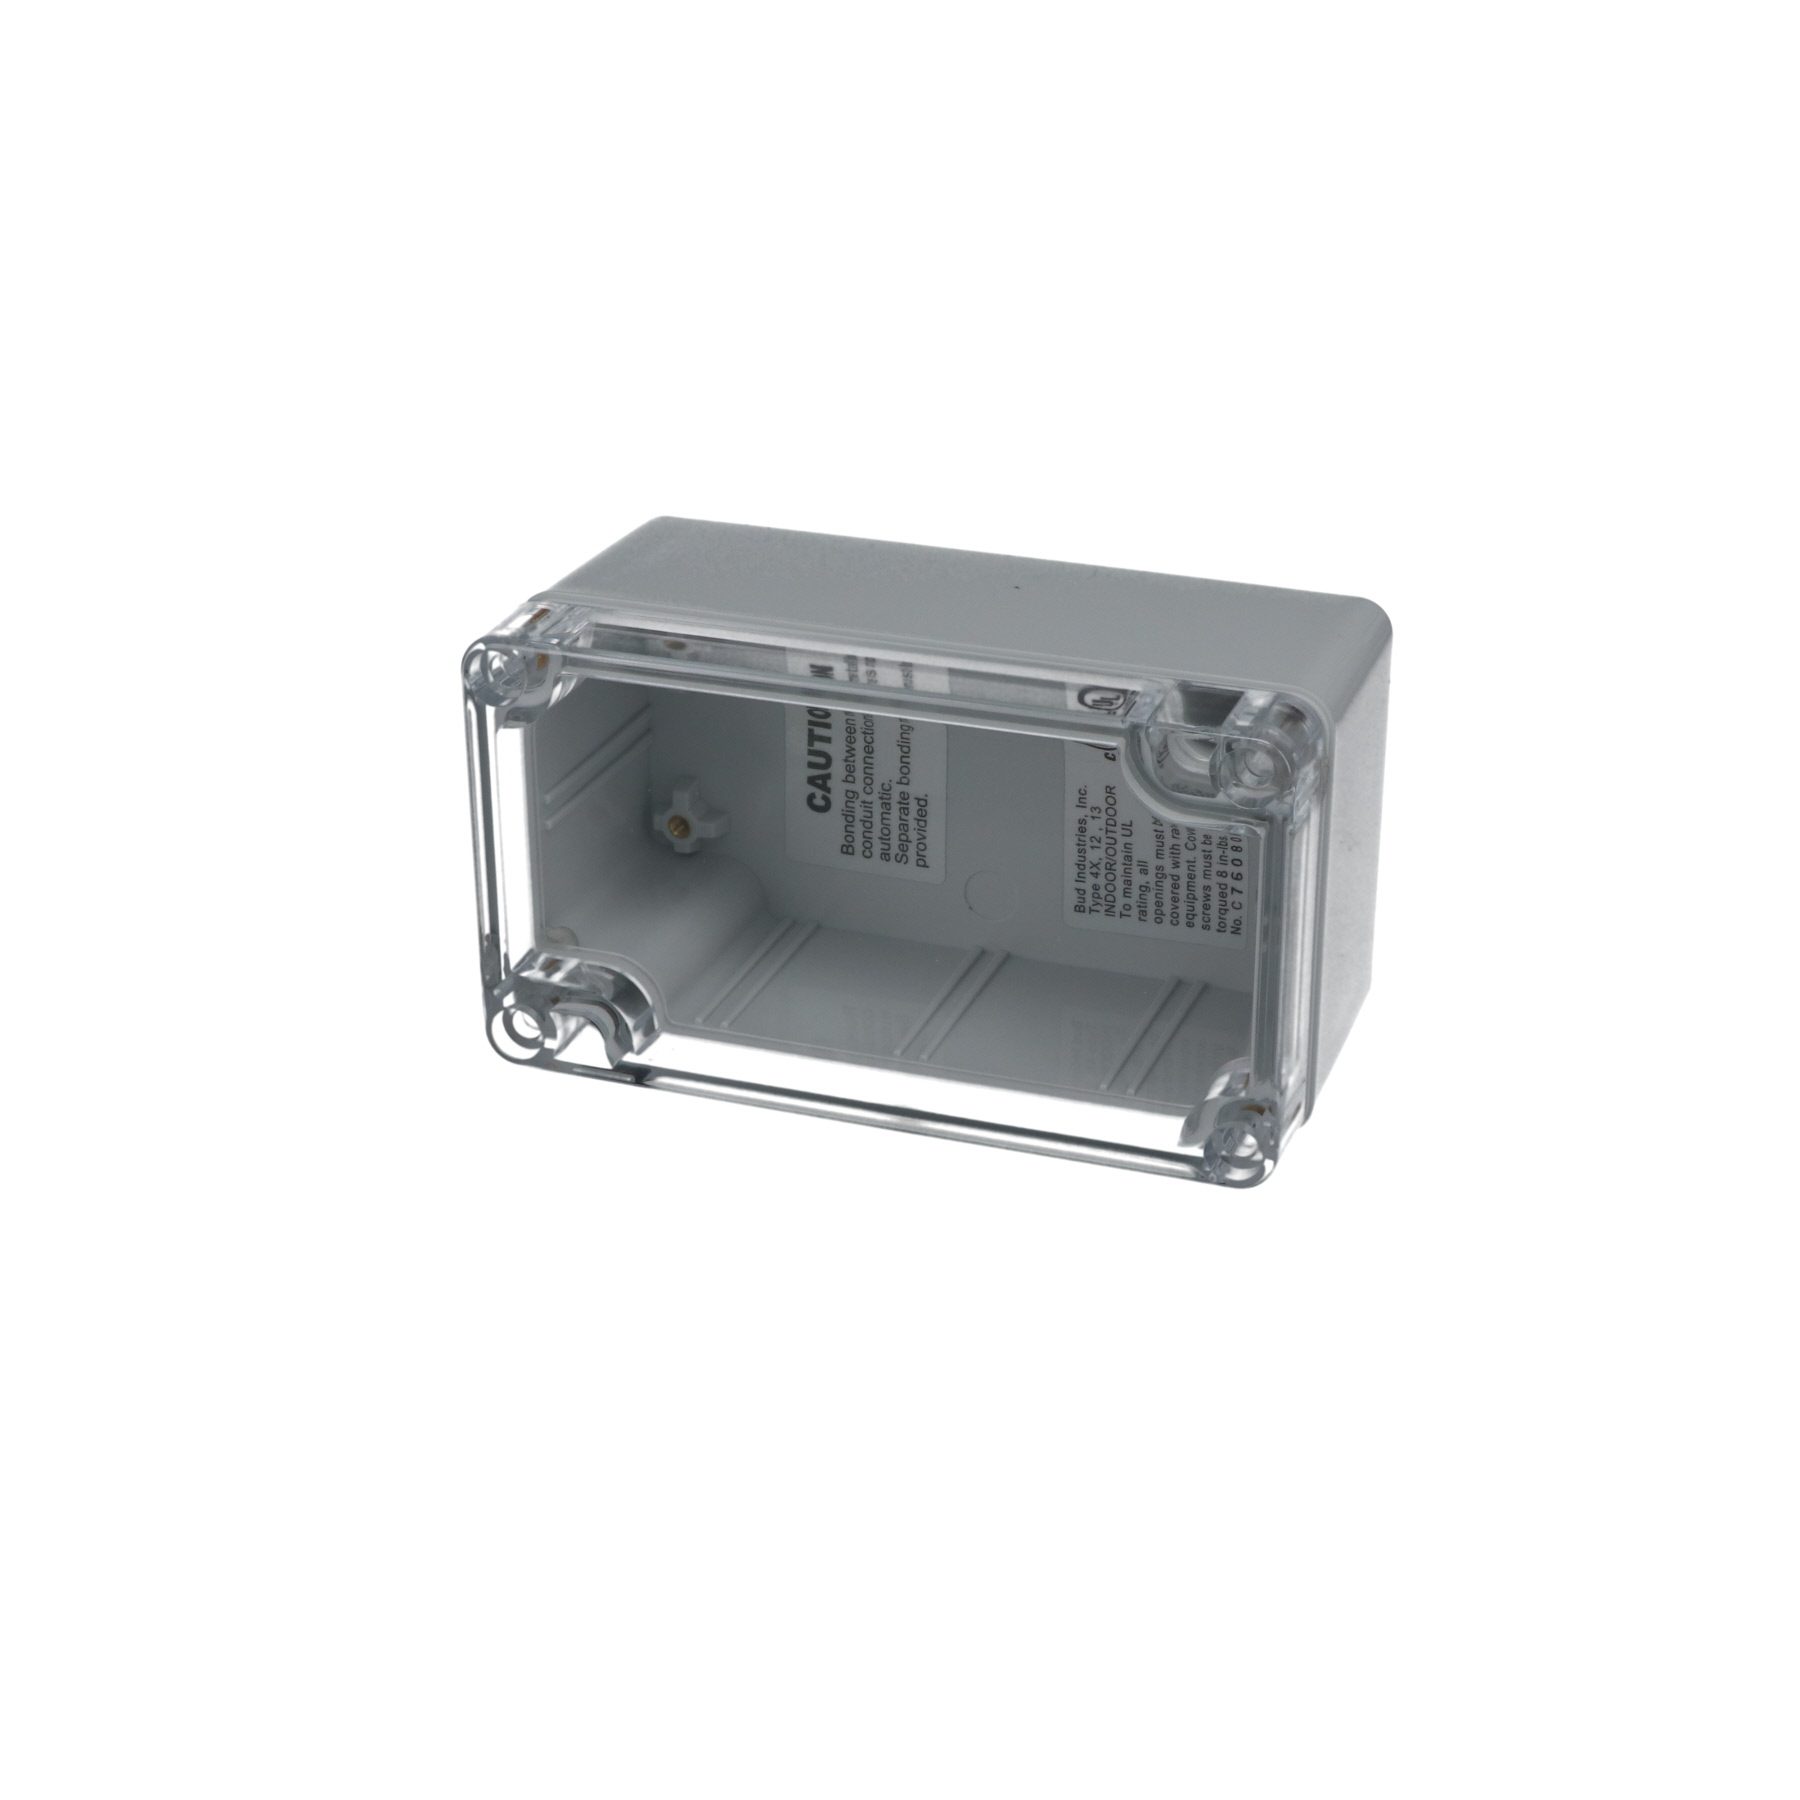 IP65 NEMA 4X Box with Clear Cover PN-1322-C